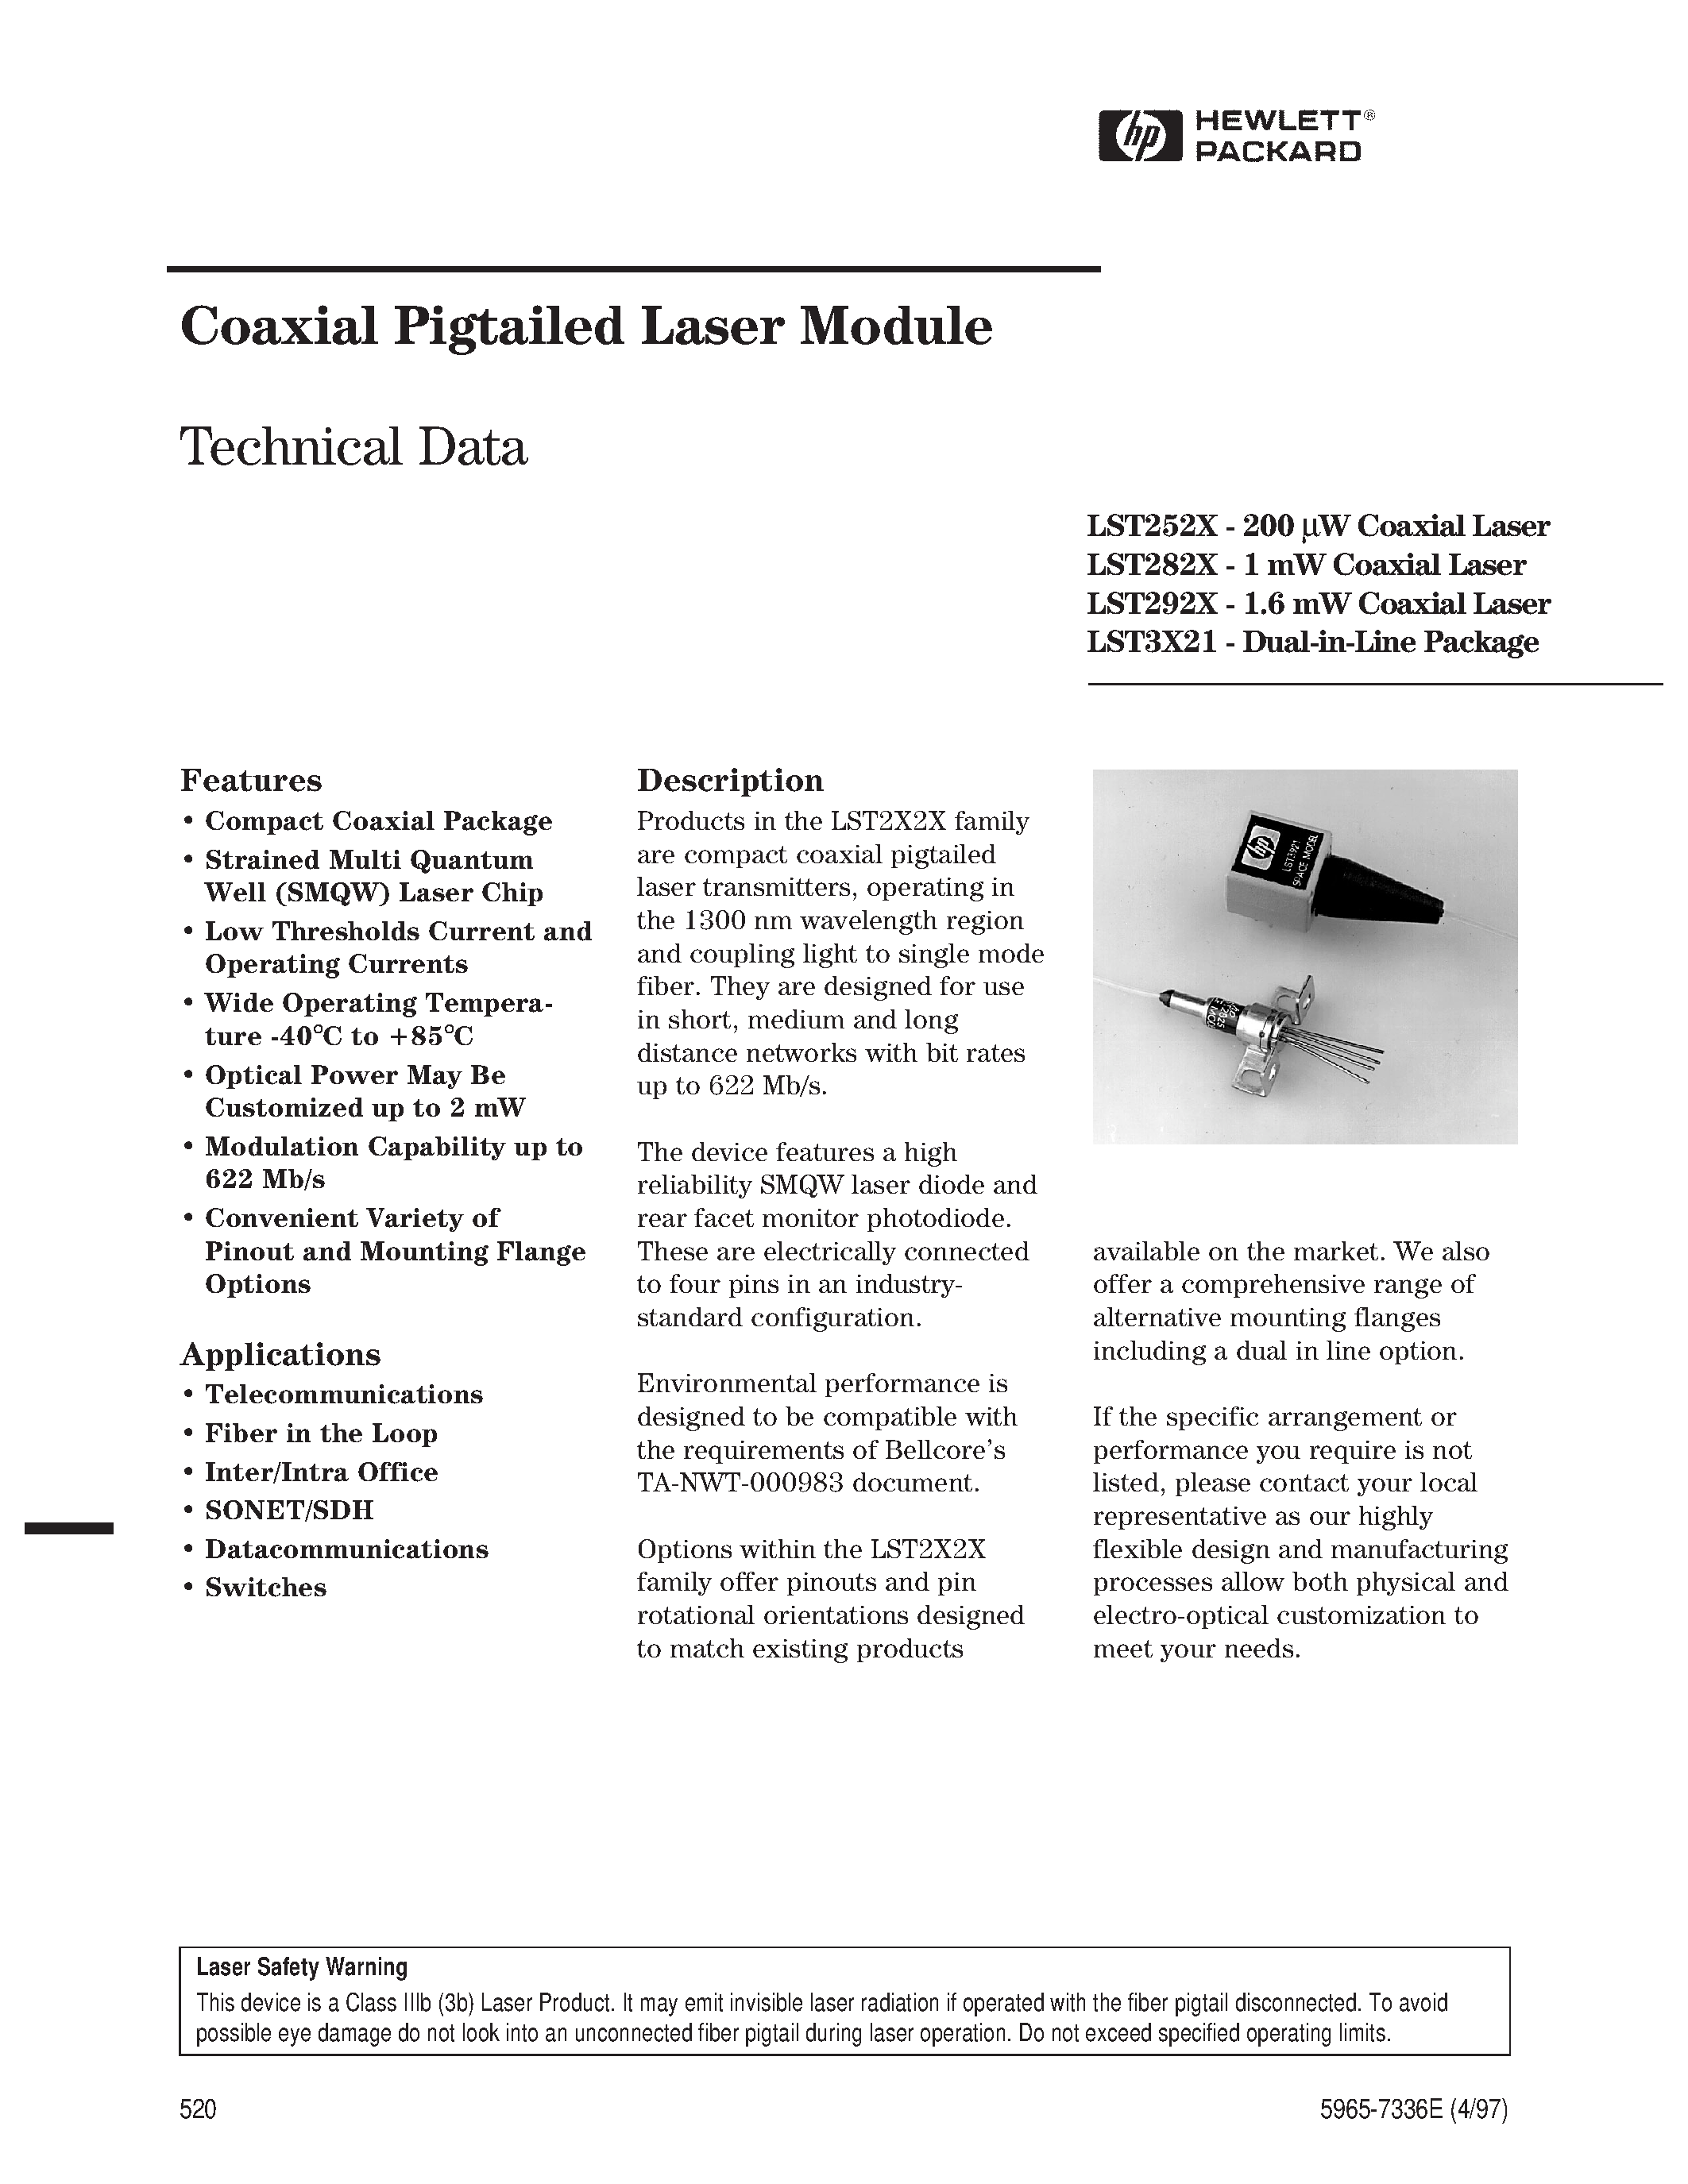 Даташит LST2525-S4-B-FP - Coaxial Pigtailed Laser Module страница 1